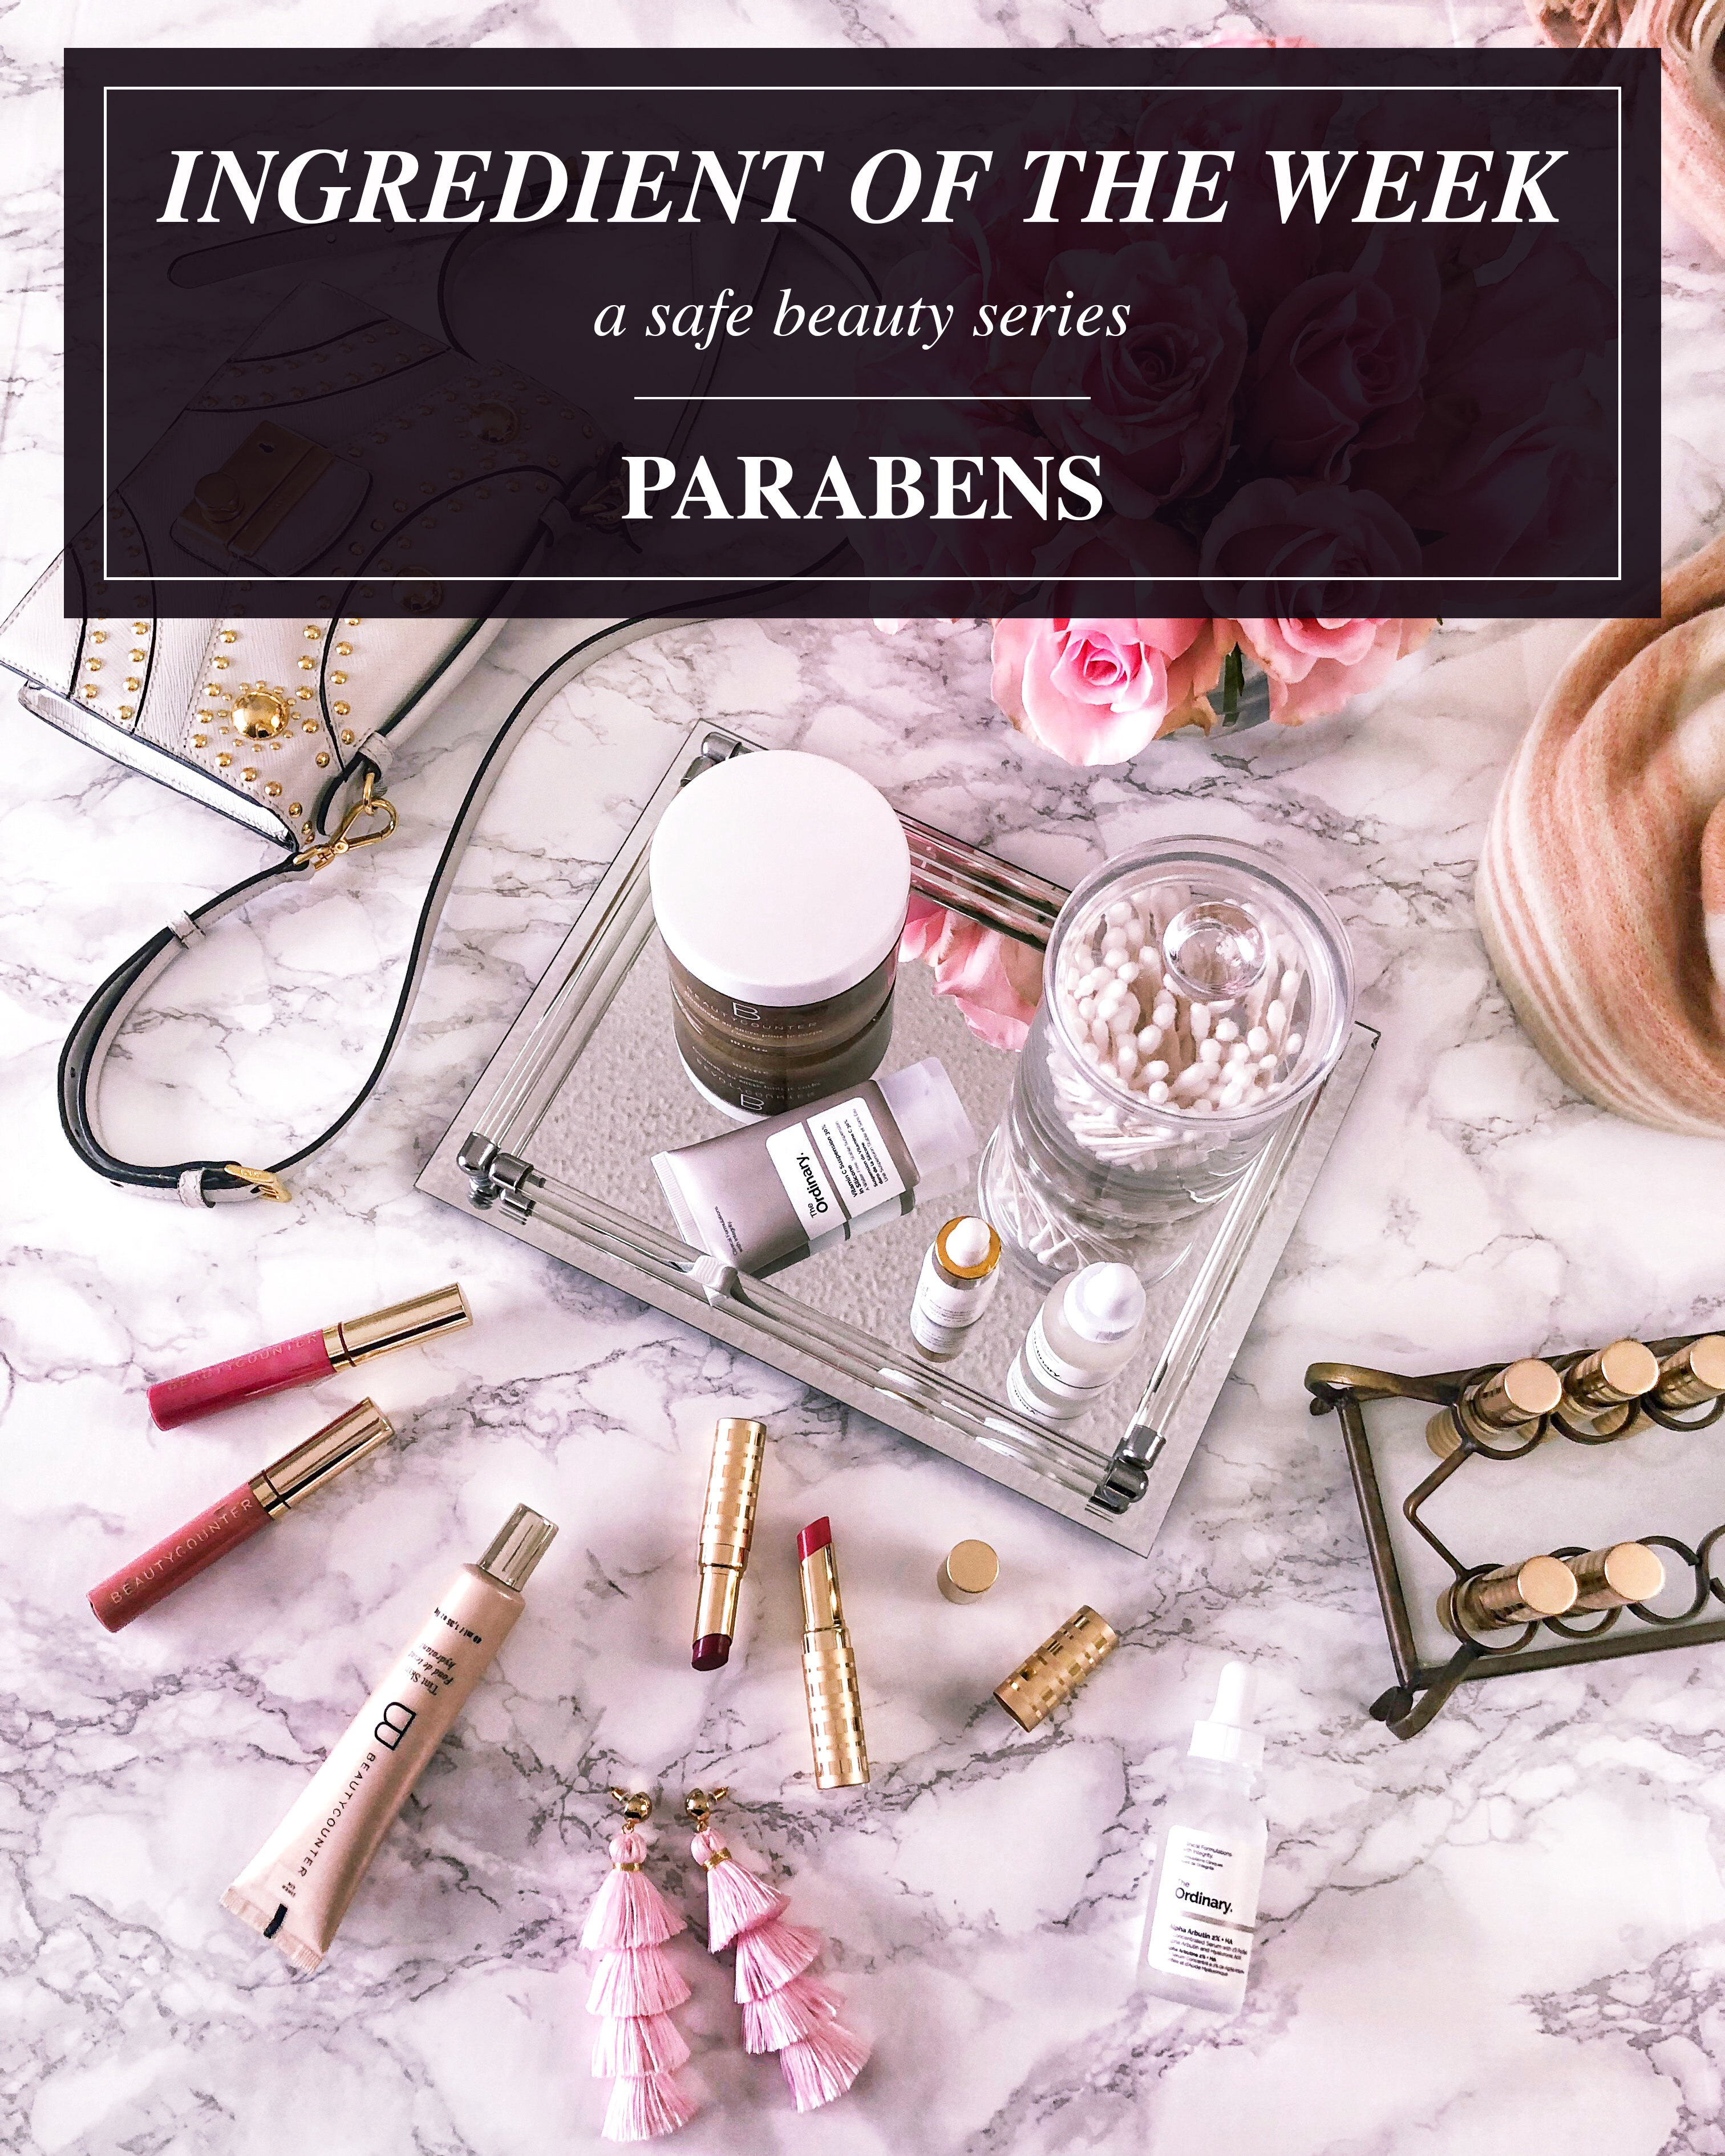 parabens in beauty products - What is Parabens? by popular Chicago beauty blogger Visions of Vogue